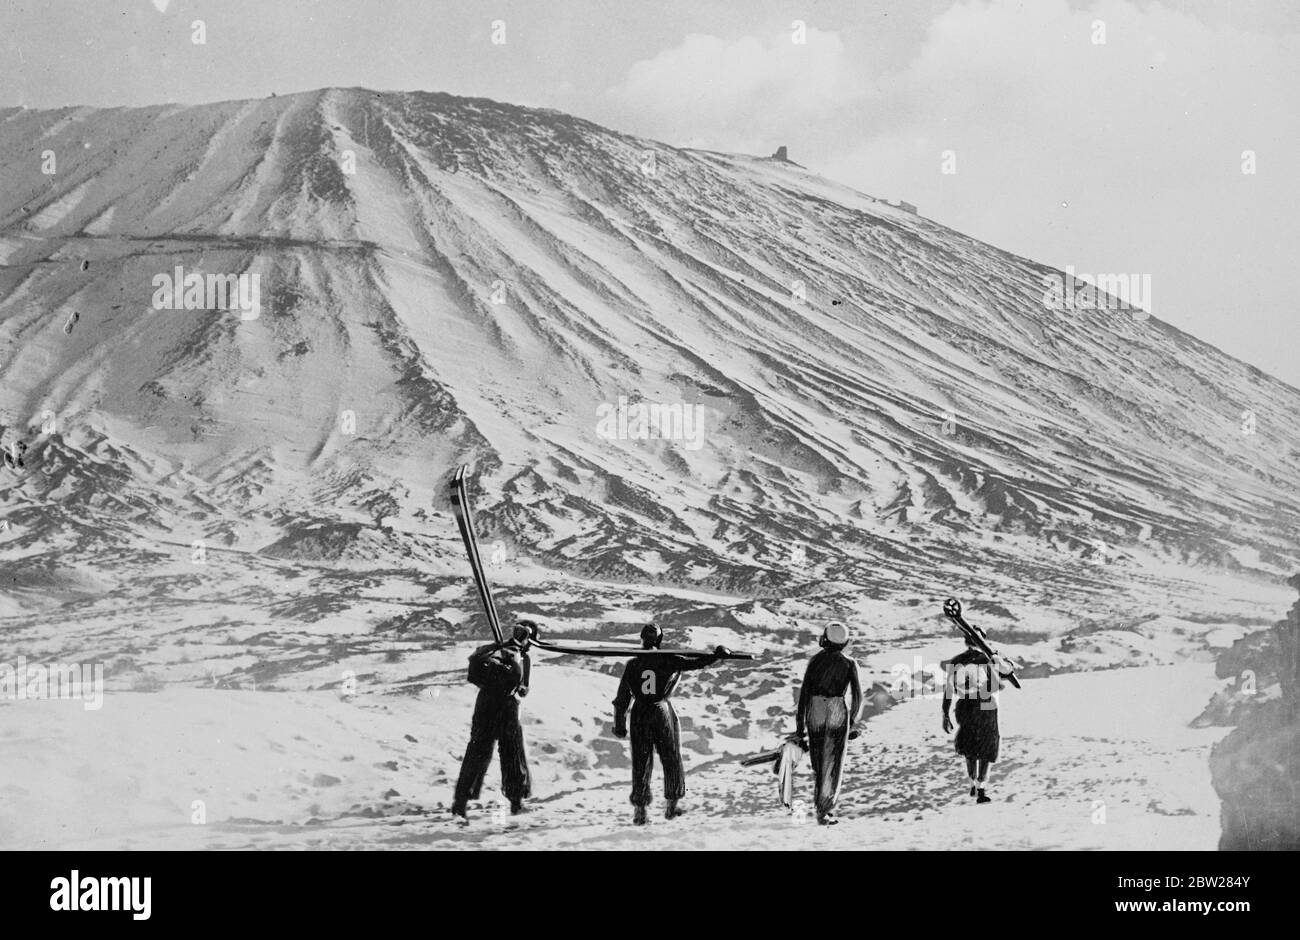 Skiing on the Vesuvius for the first time in years. The intense cold has covered Vesuvius with slow for the first time in many years and skiing enthusiasts from Naples are now enjoying good sport on the slopes of the volcano. Photo shows, skiers approaching snowclad Vesuvius. 14 January 1938 Stock Photo